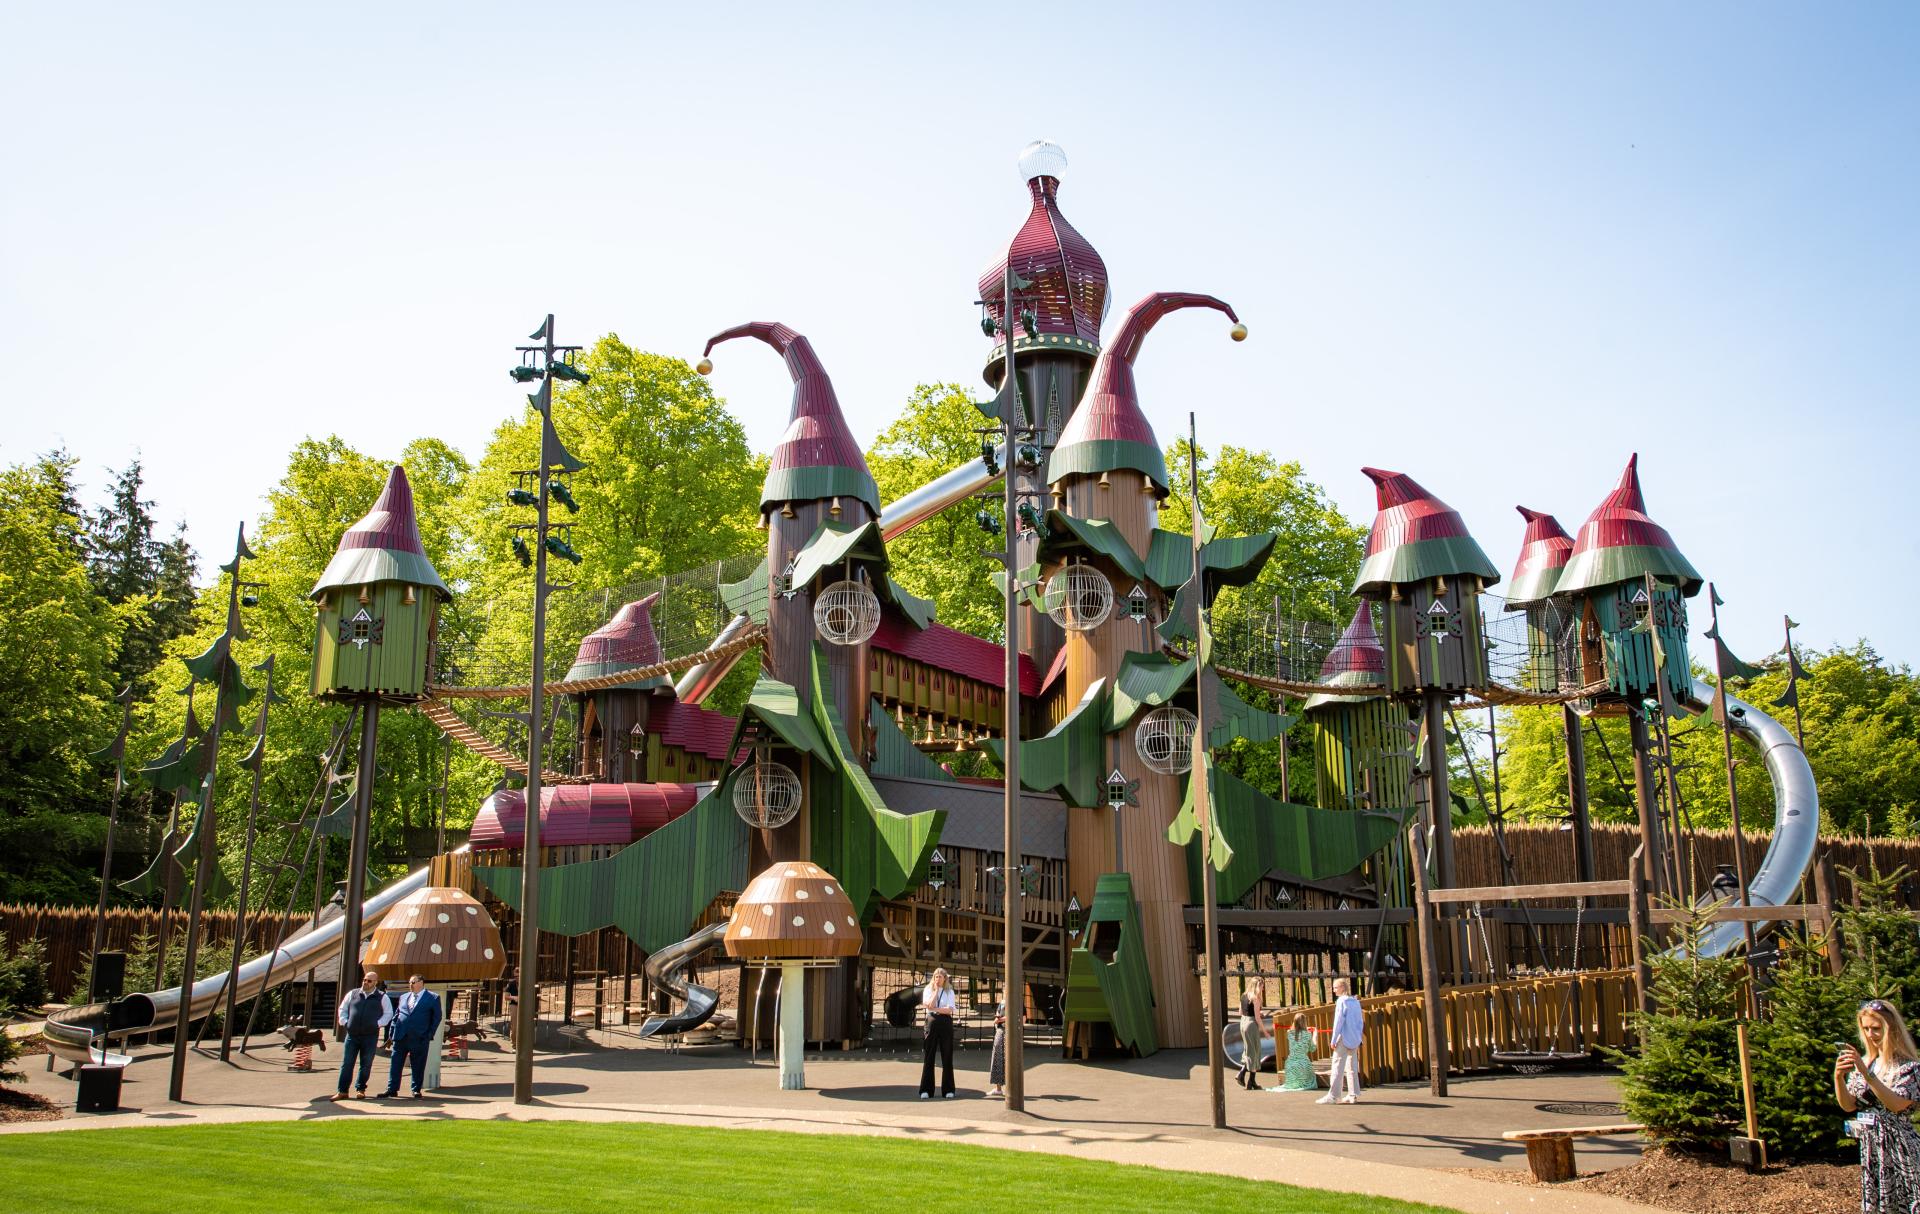 Lilidorei play structure